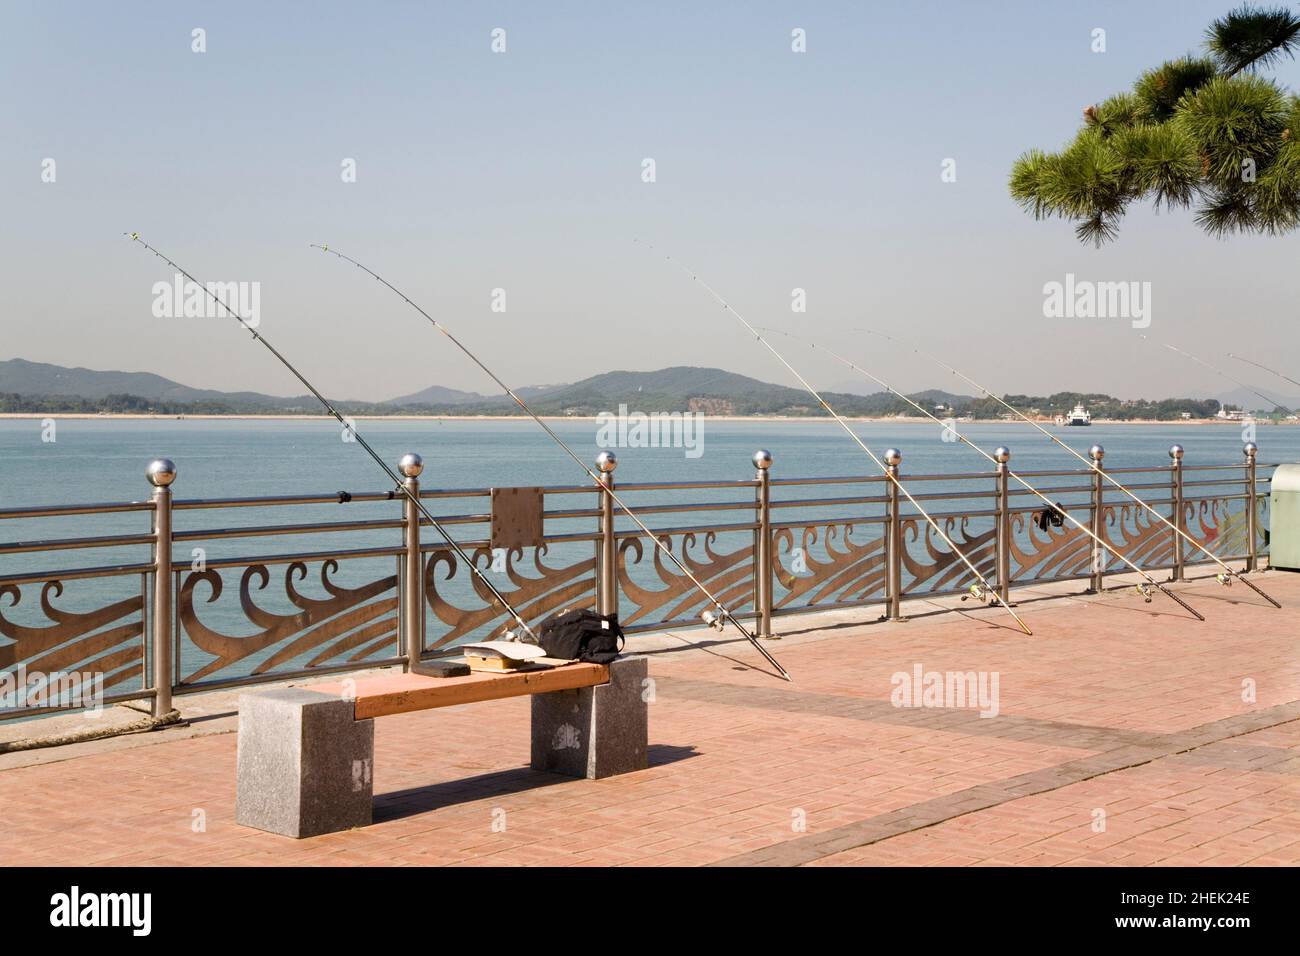 Five unattended fishing rods lined up along the promenade at Wolmido, Seoul, the capital of South Korea Stock Photo